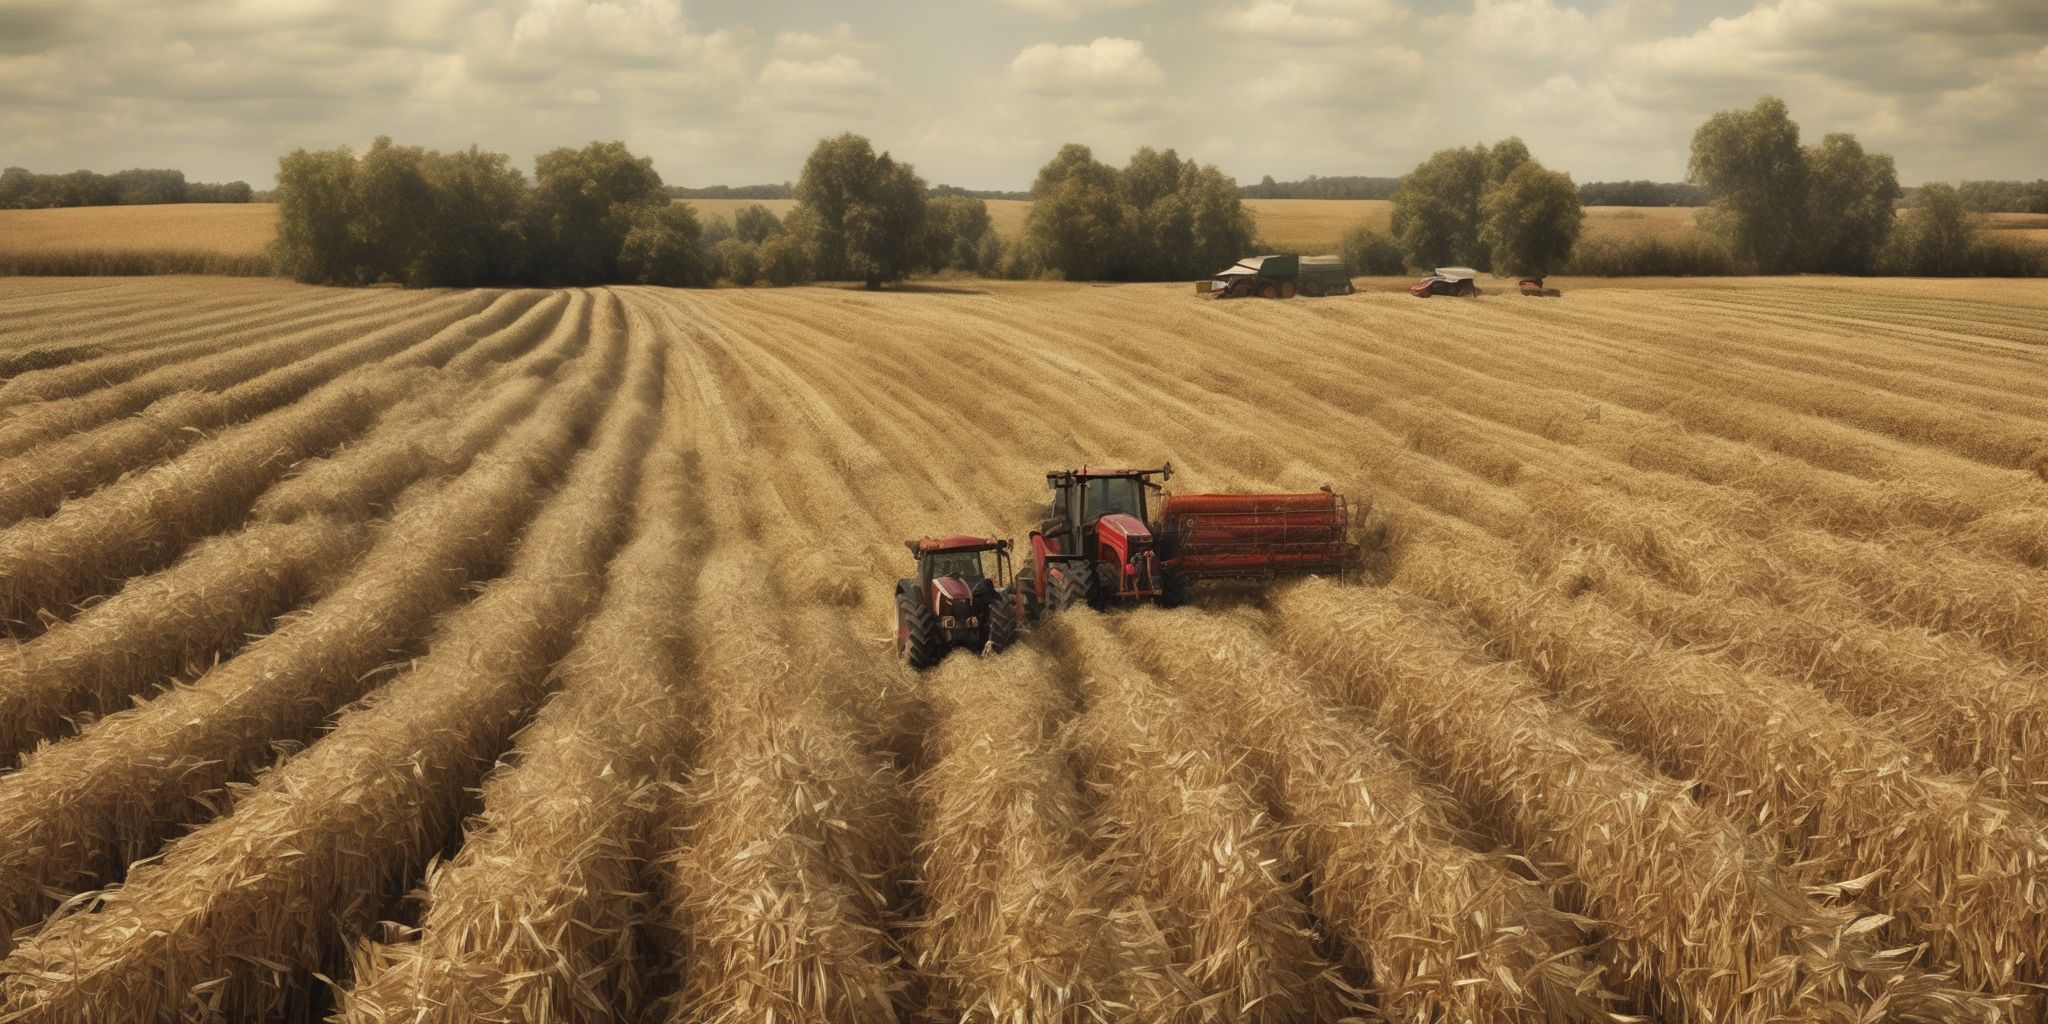 Yield: Harvest  in realistic, photographic style